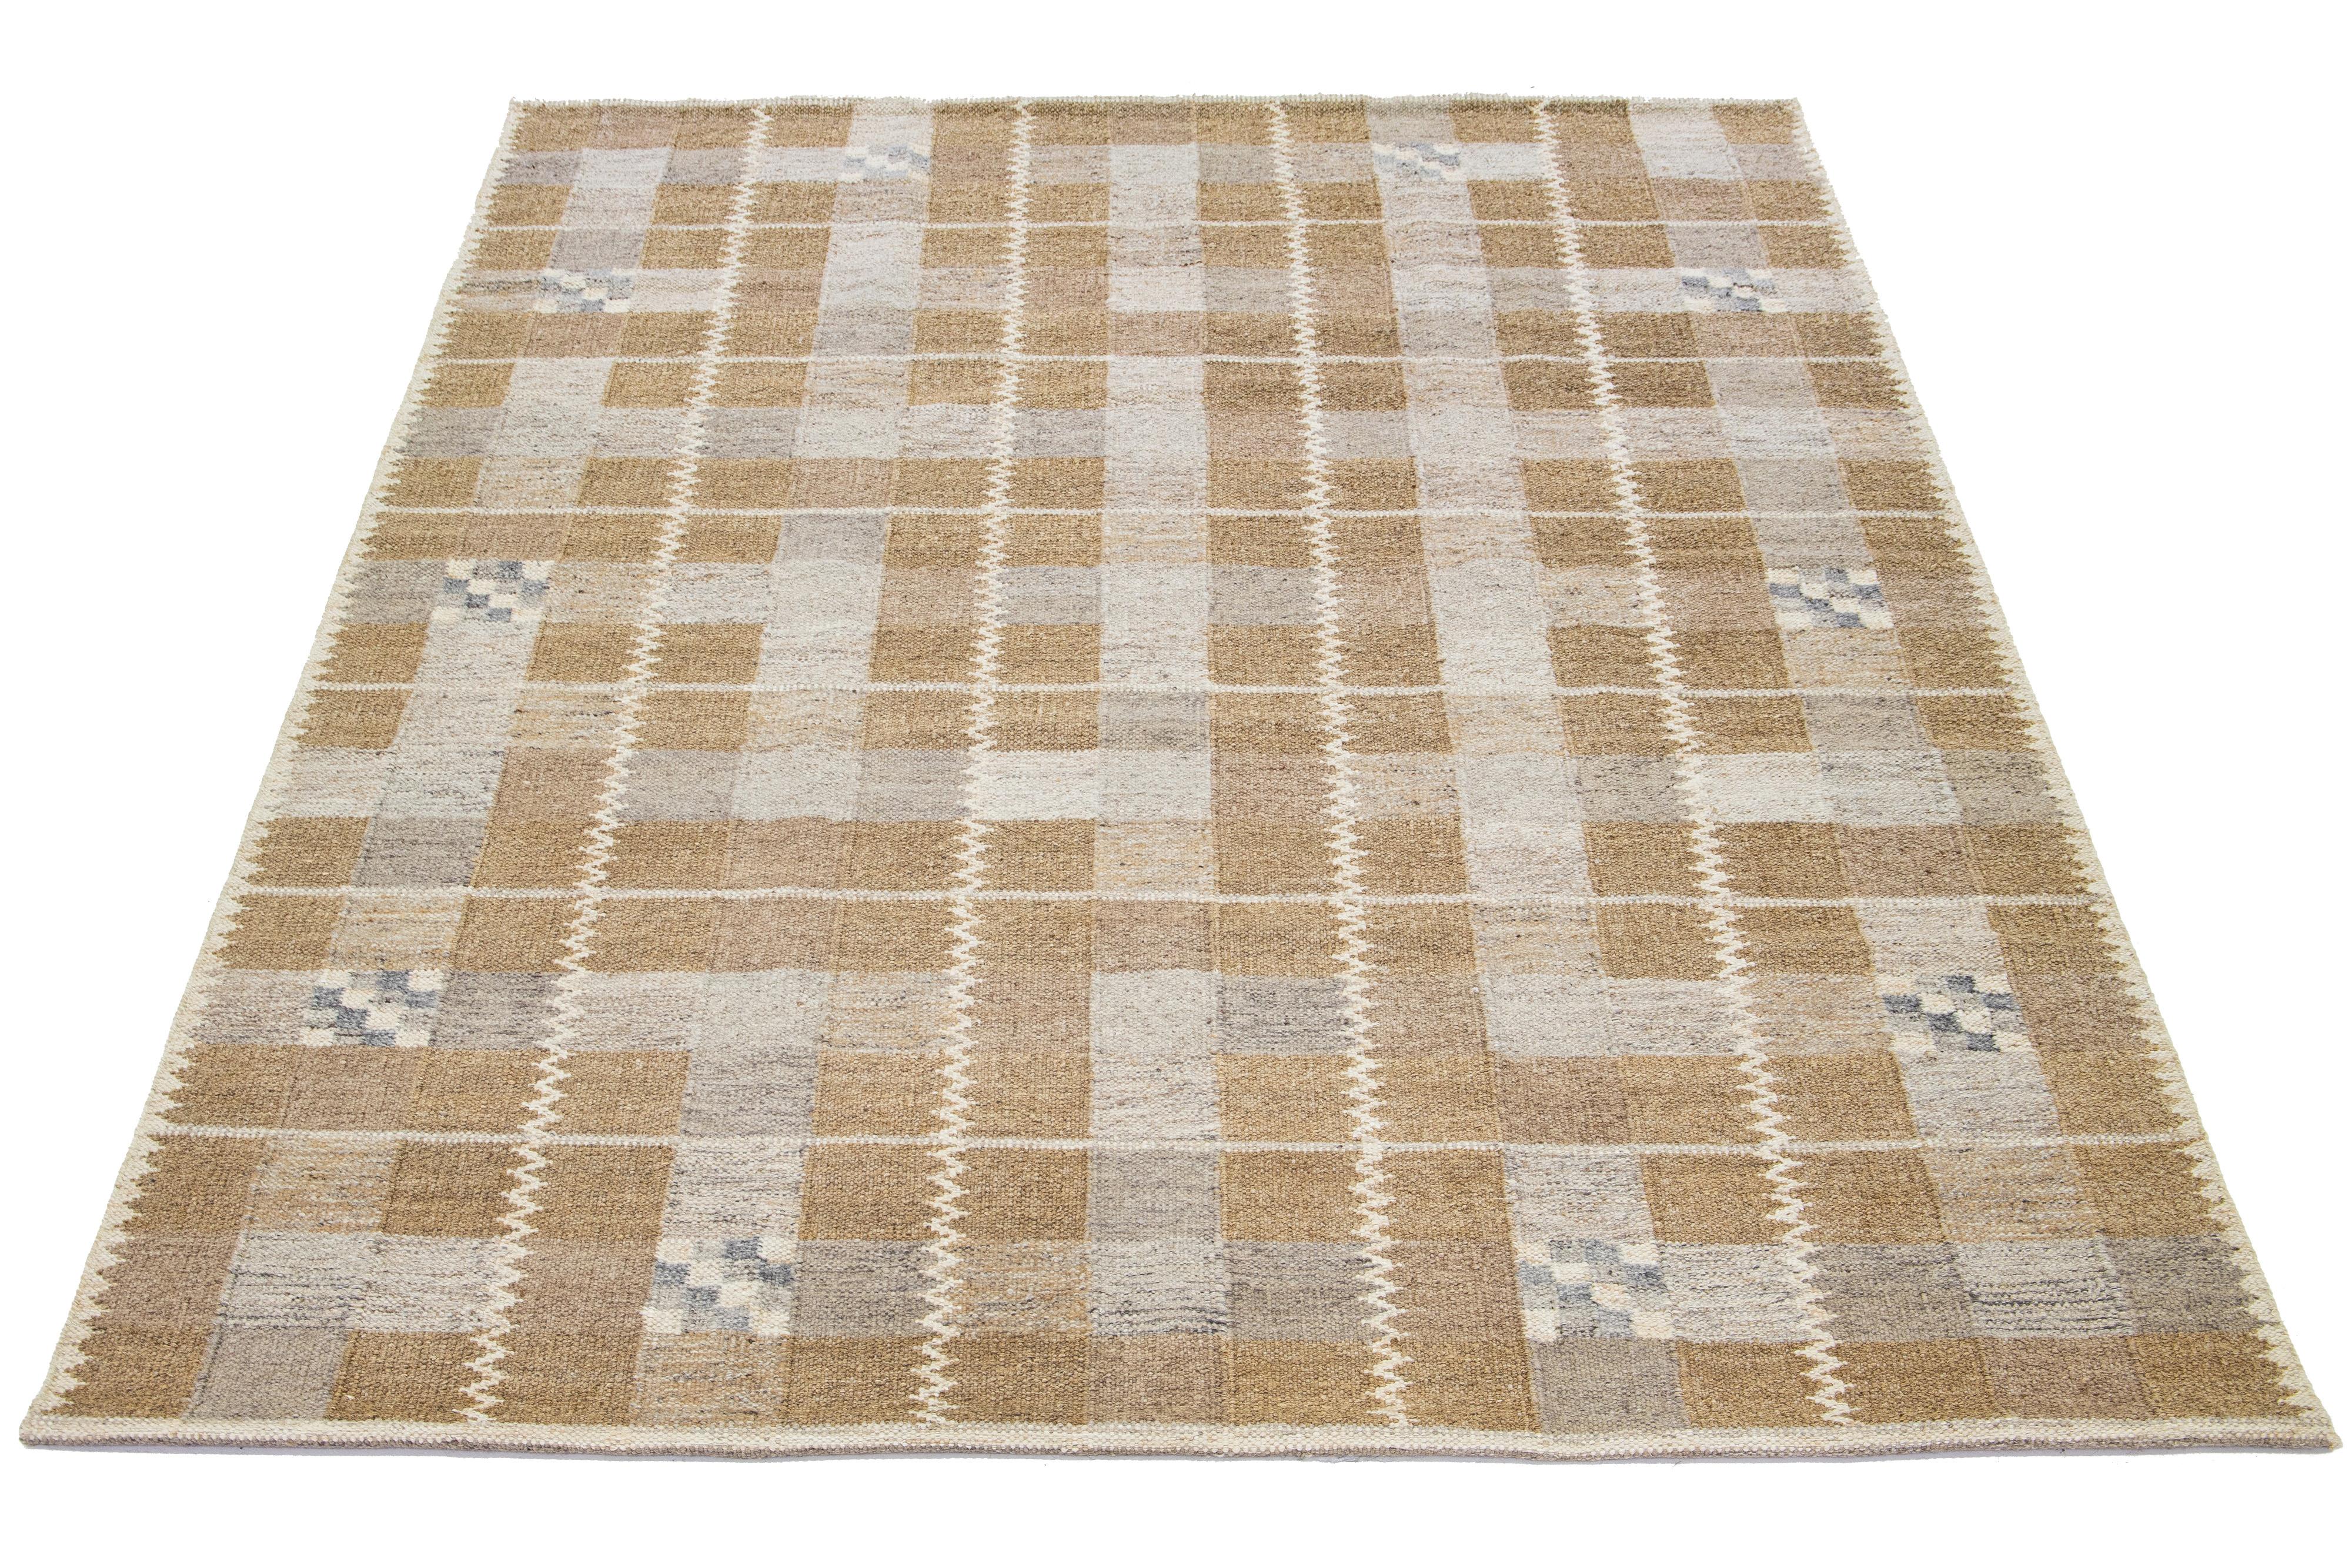 This modern woolen rug exhibits a remarkable tan foundation, flawlessly fusing Nordic-inspired design with exquisite geometric patterns containing delicate hints of gray and beige. The rug is crafted from a combination of wool and hemp, utilizing